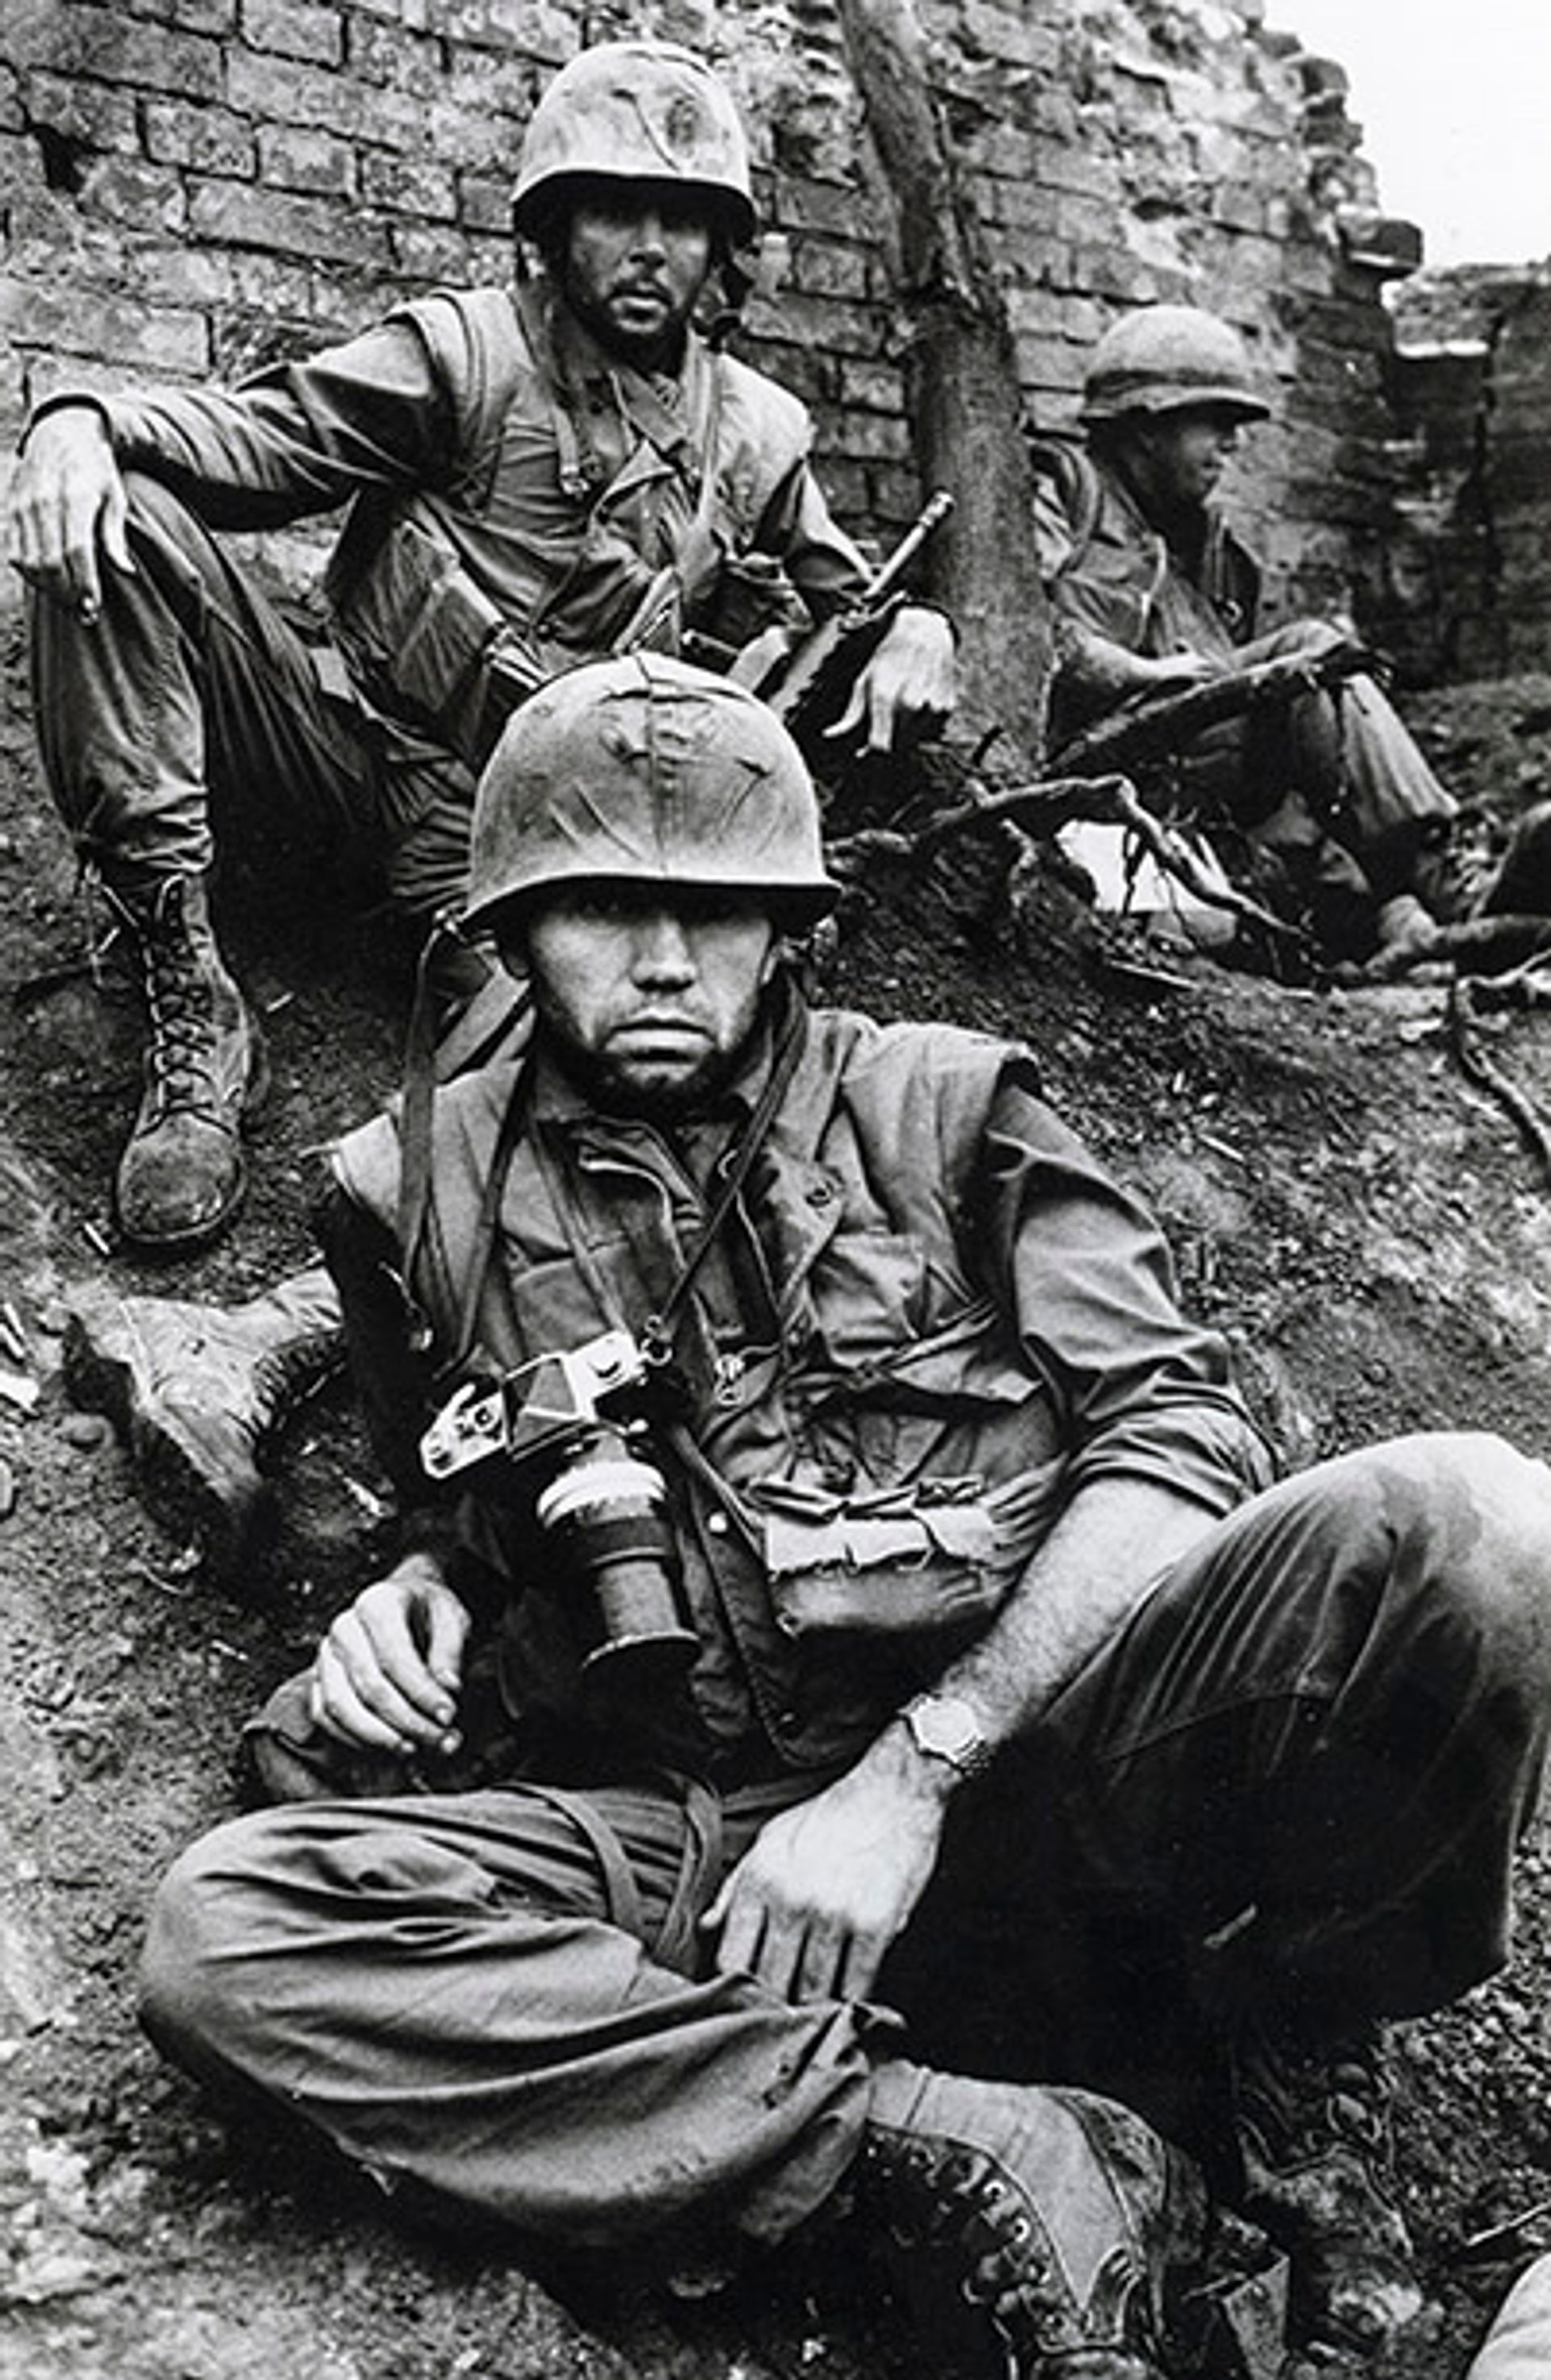 Don McCullin in Hue, Vietnam, during the Tet Offensive in 1968 © Nik Wheeler